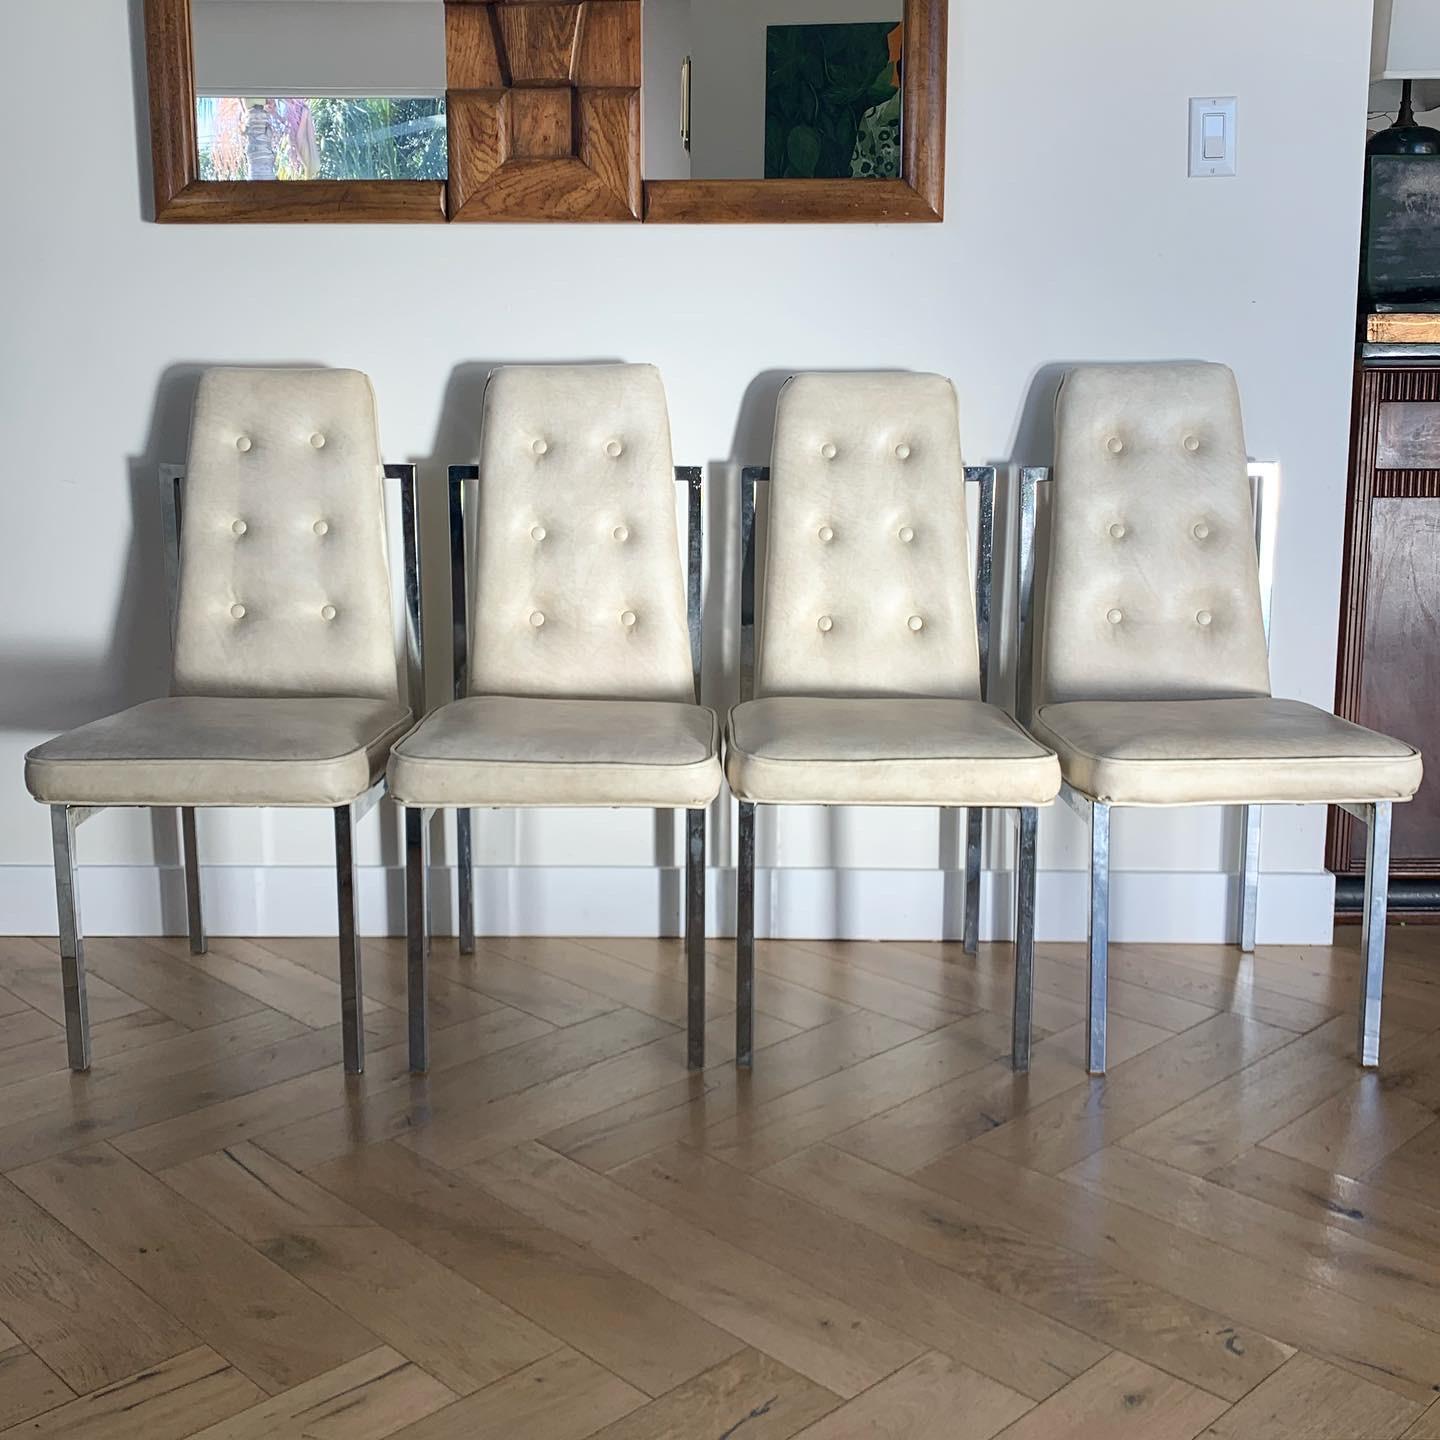 Set of 4 Cal-Style dining chairs in original ivory leather with chrome frames. Fab geometry and button chic classic to Cal-Style. Leather folds over the back of chair. Circa early 1970s. Great condition with minor signs of age noted in slides. .